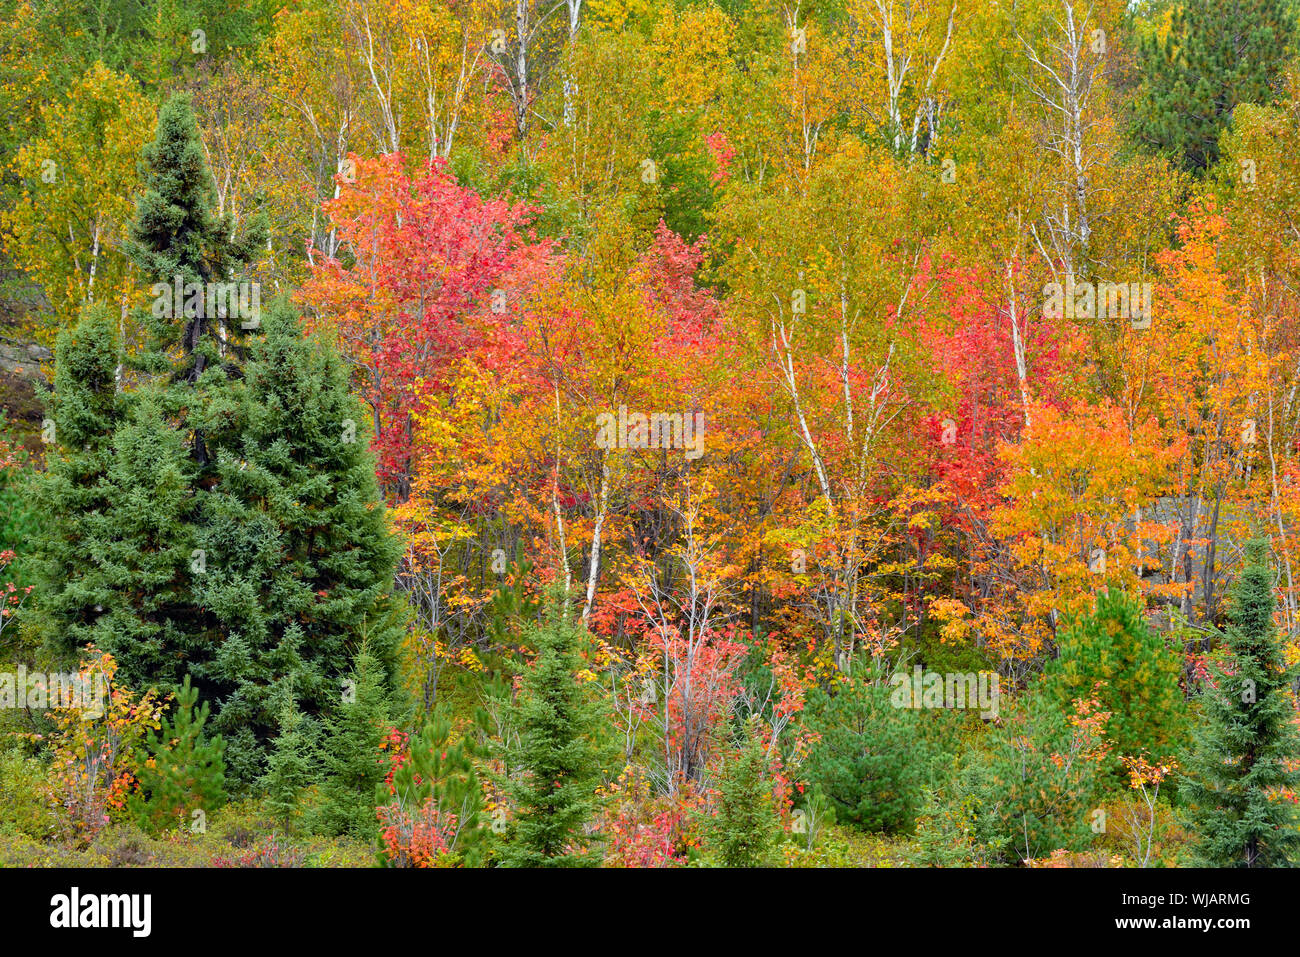 Autumn colour in a mixed forest woodland, Greater Sudbury, Ontario, Canada  Stock Photo - Alamy